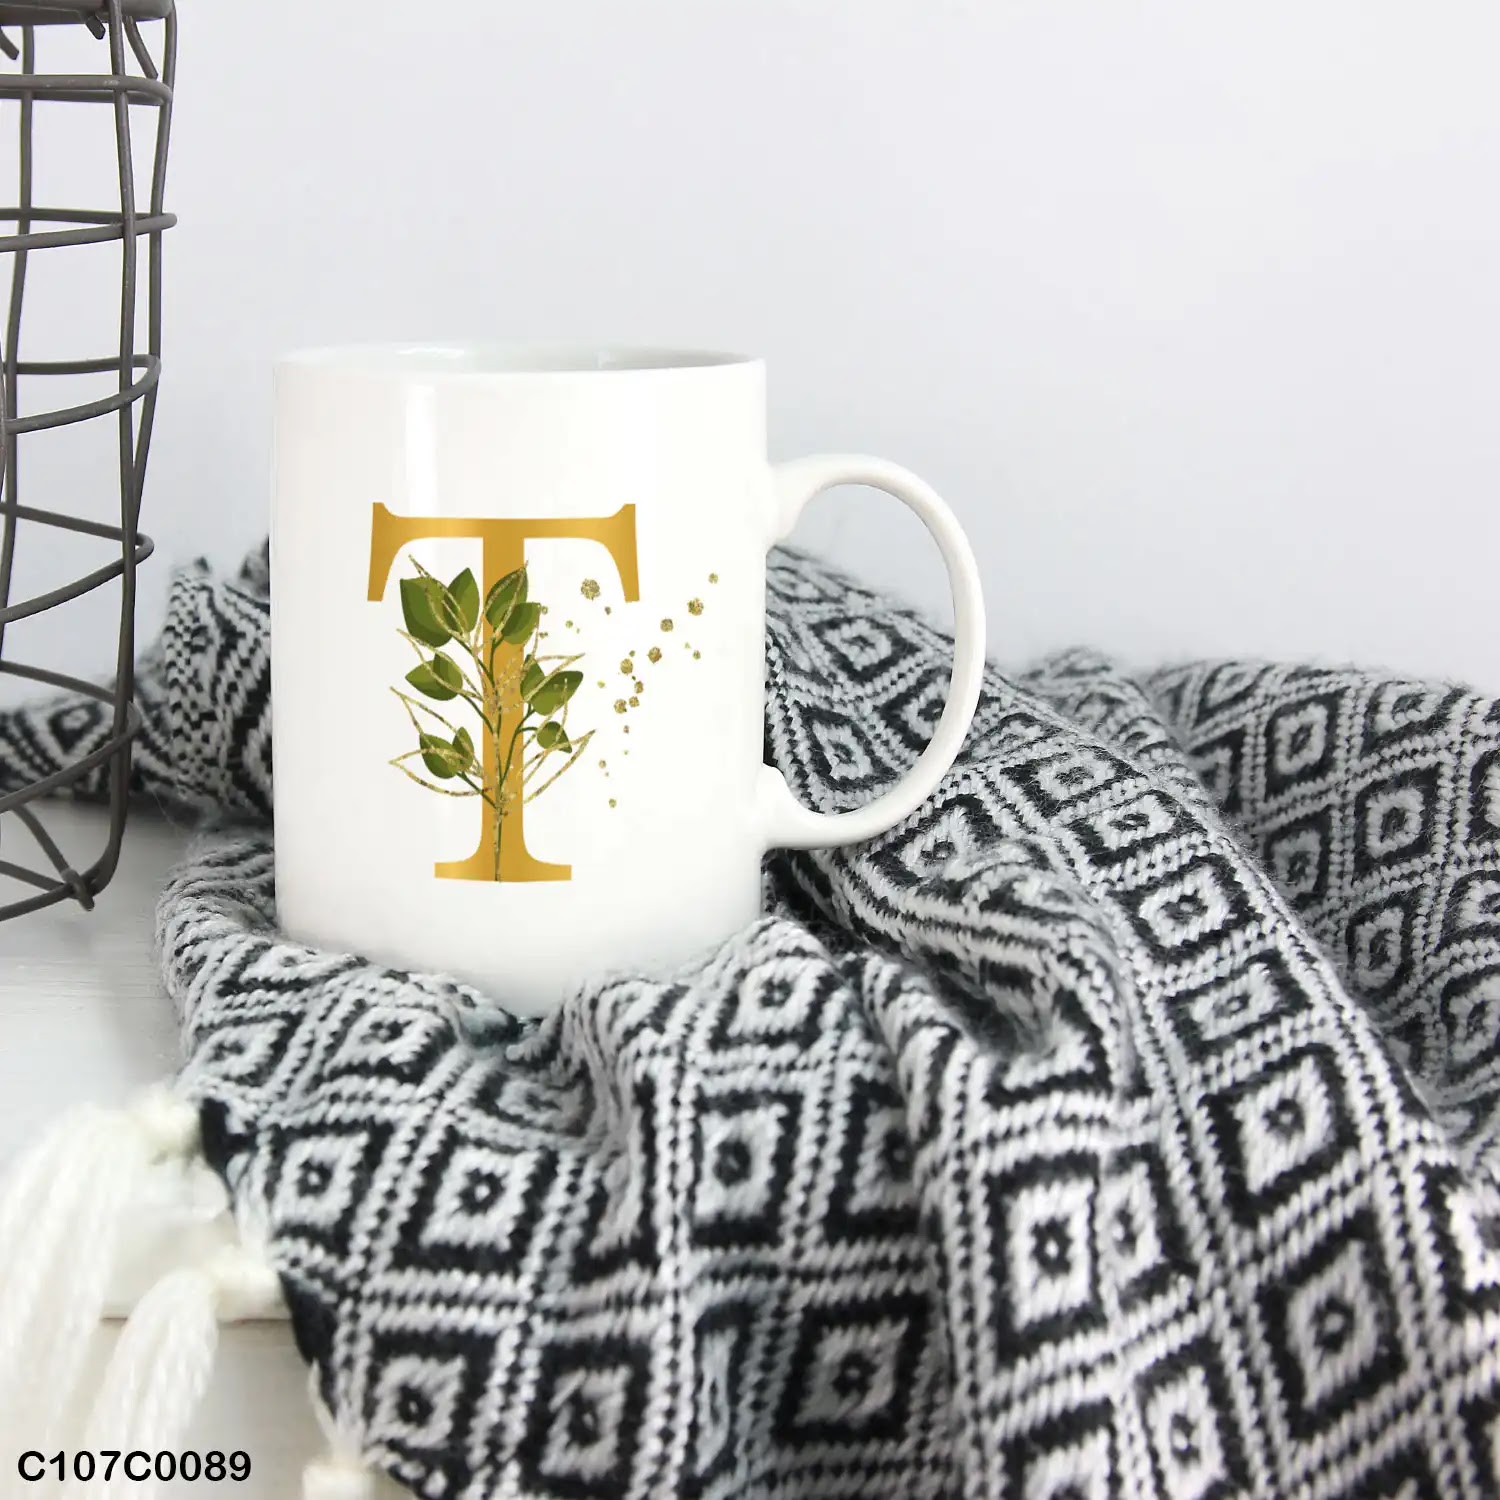 A white mug (cup) printed with gold Letter "T"and small green branch